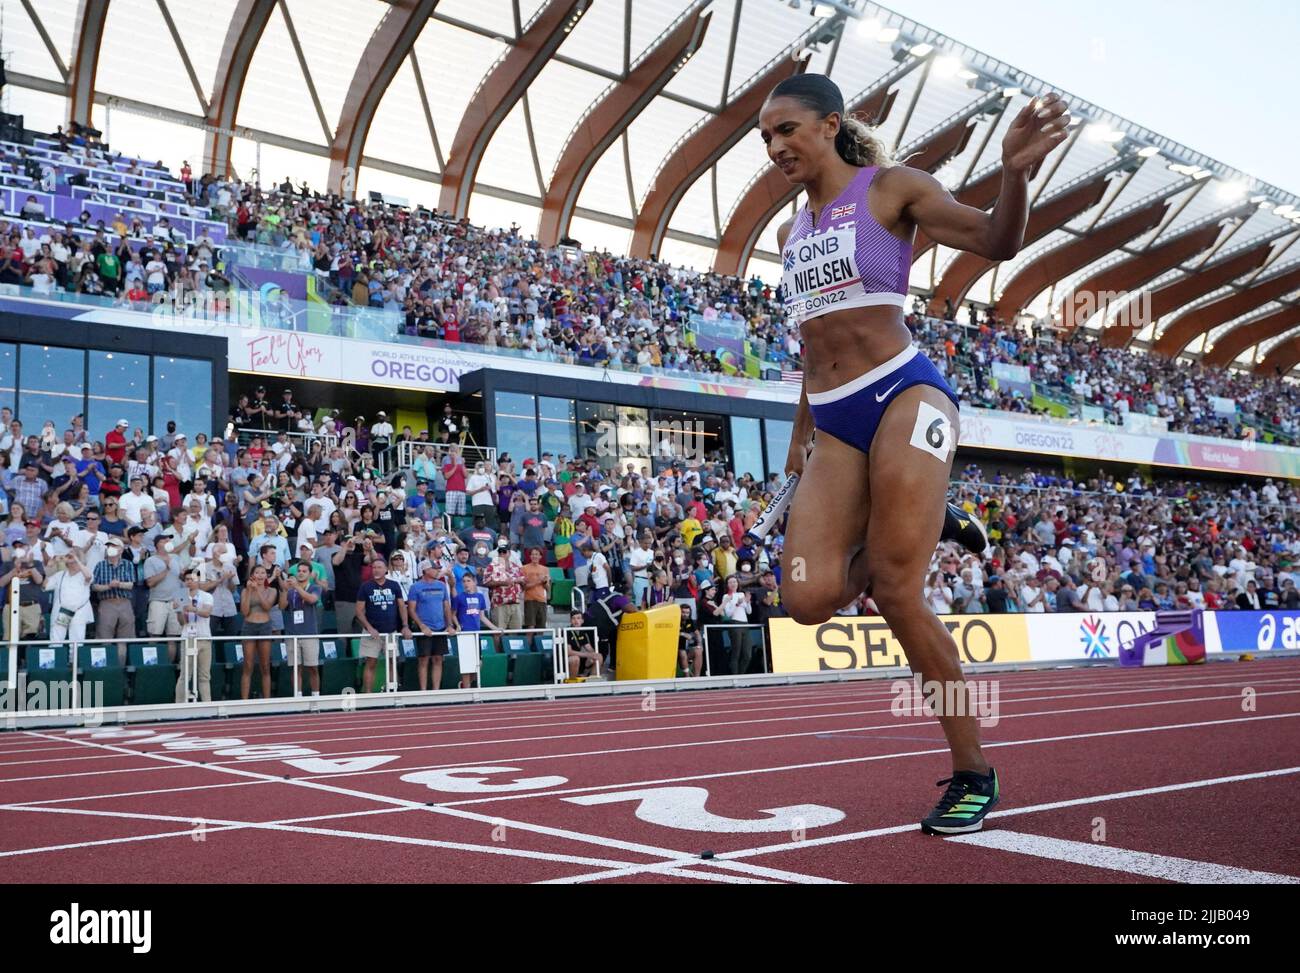 Athletics - World Athletics Championships - Women's 4x400 Metres Relay - Final - Hayward Field, Eugene, Oregon, U.S. - July 24, 2022 Britain's Laviai Nielsen crosses the line to finish the women's 4x400 metres final in third place REUTERS/Lucy Nicholson Stock Photo